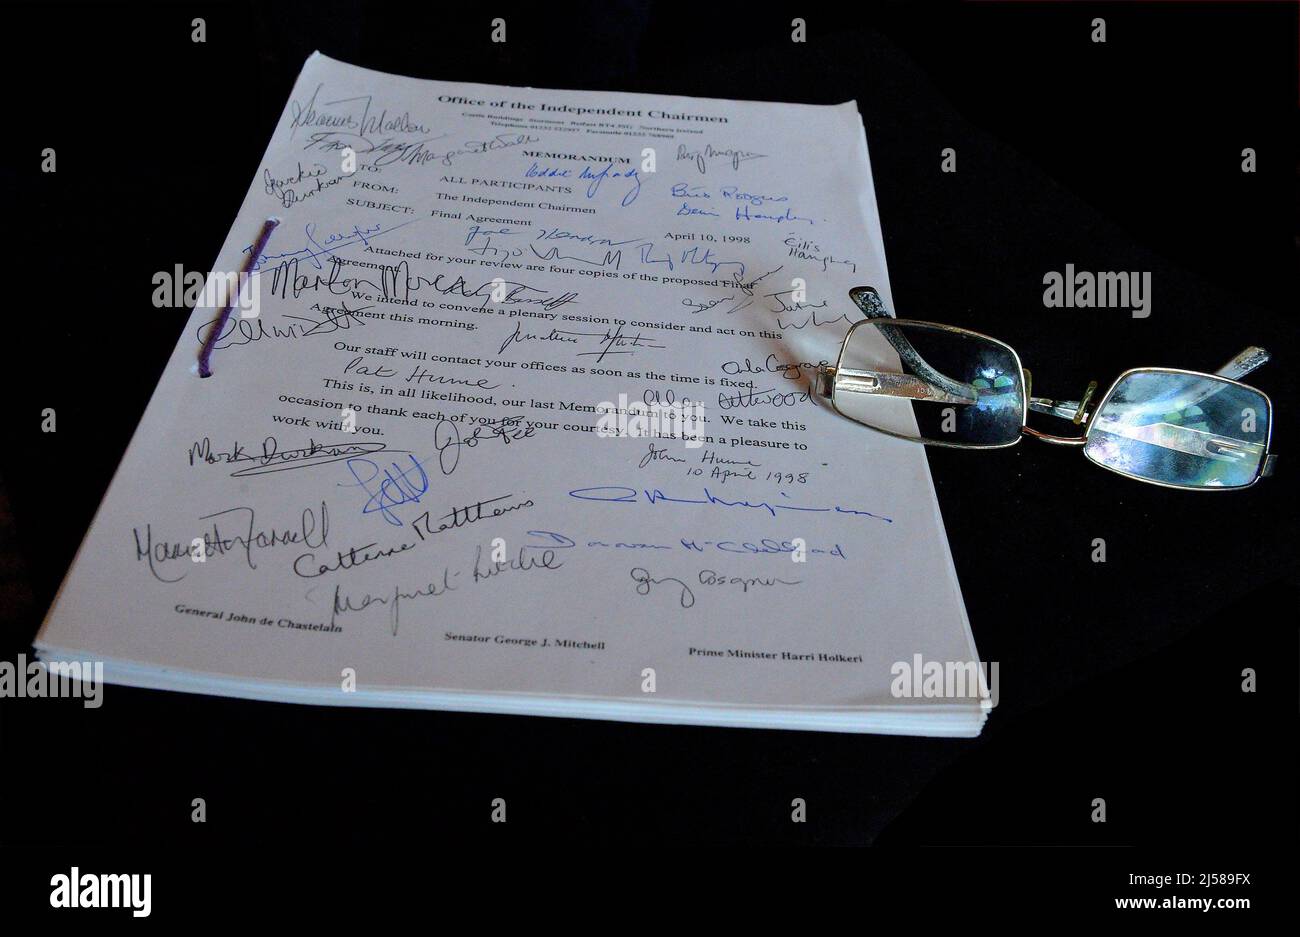 A pair of glasses belonging to John Hume on a copy of the Good Friday Agreement dated April 10 1998 signed by nationalist Social Labour and Democratic (SDLP) negotiators and members. ©George Sweeney / Alamy Stock Photo Stock Photo